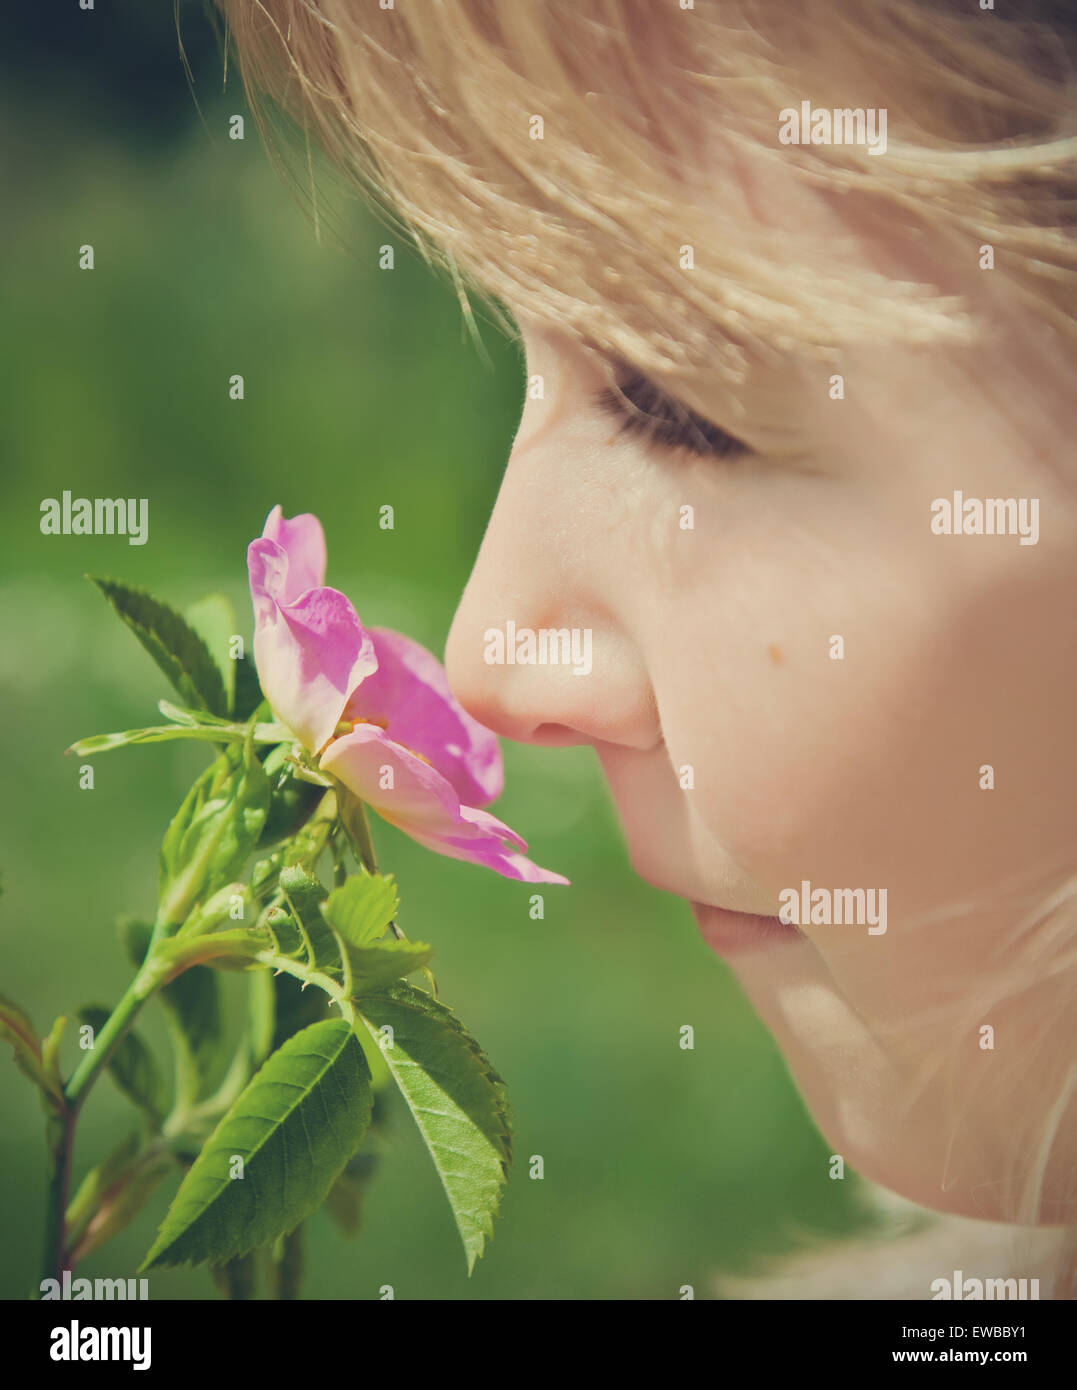 young girl smelling pink blossom Stock Photo